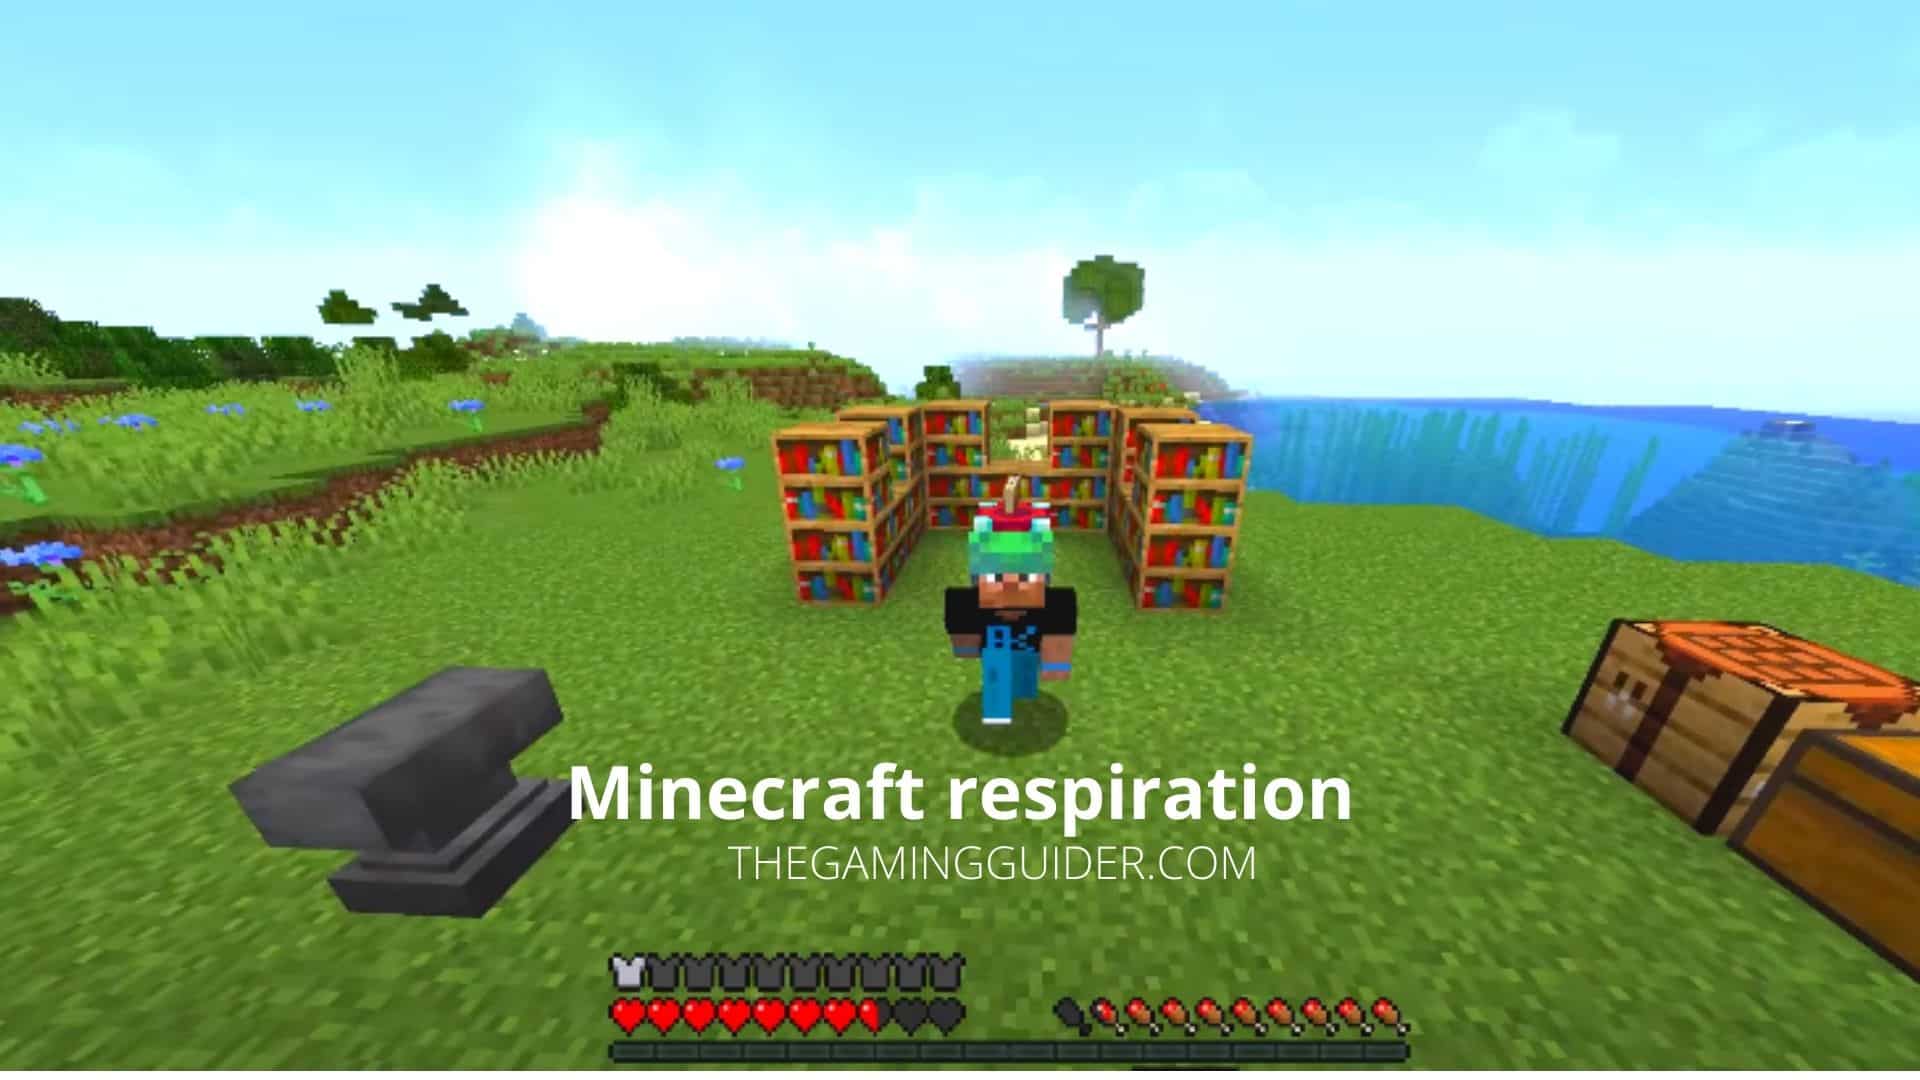 Minecraft respiration-the gaming guider